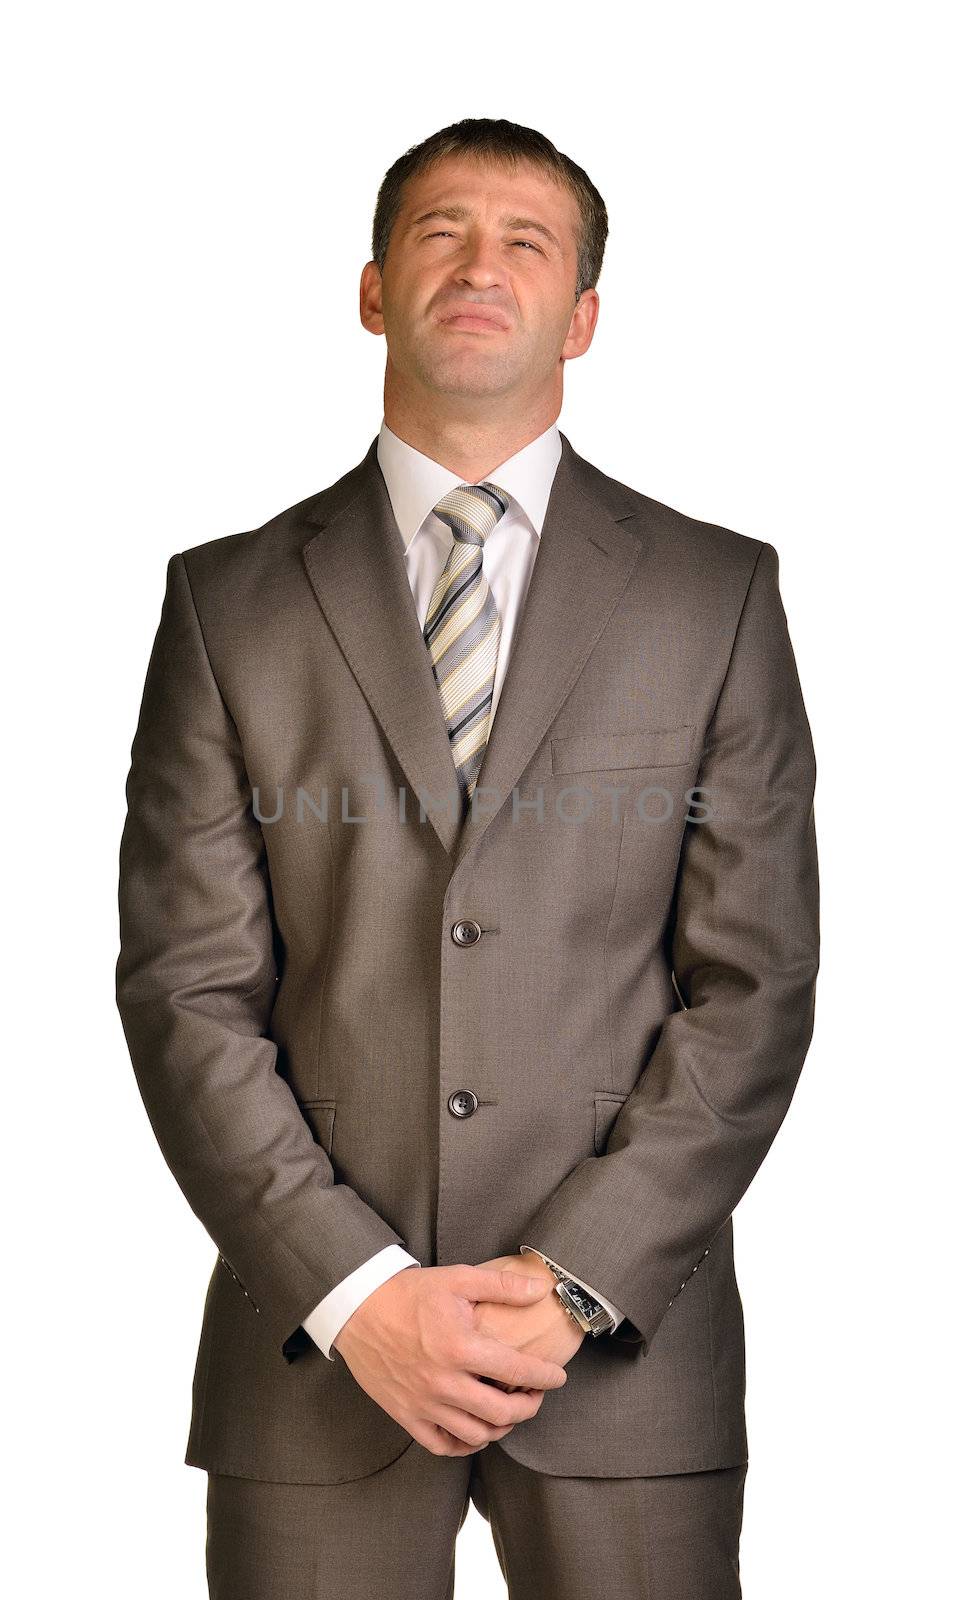 Businessman with disdain on her face. Isolated on white background